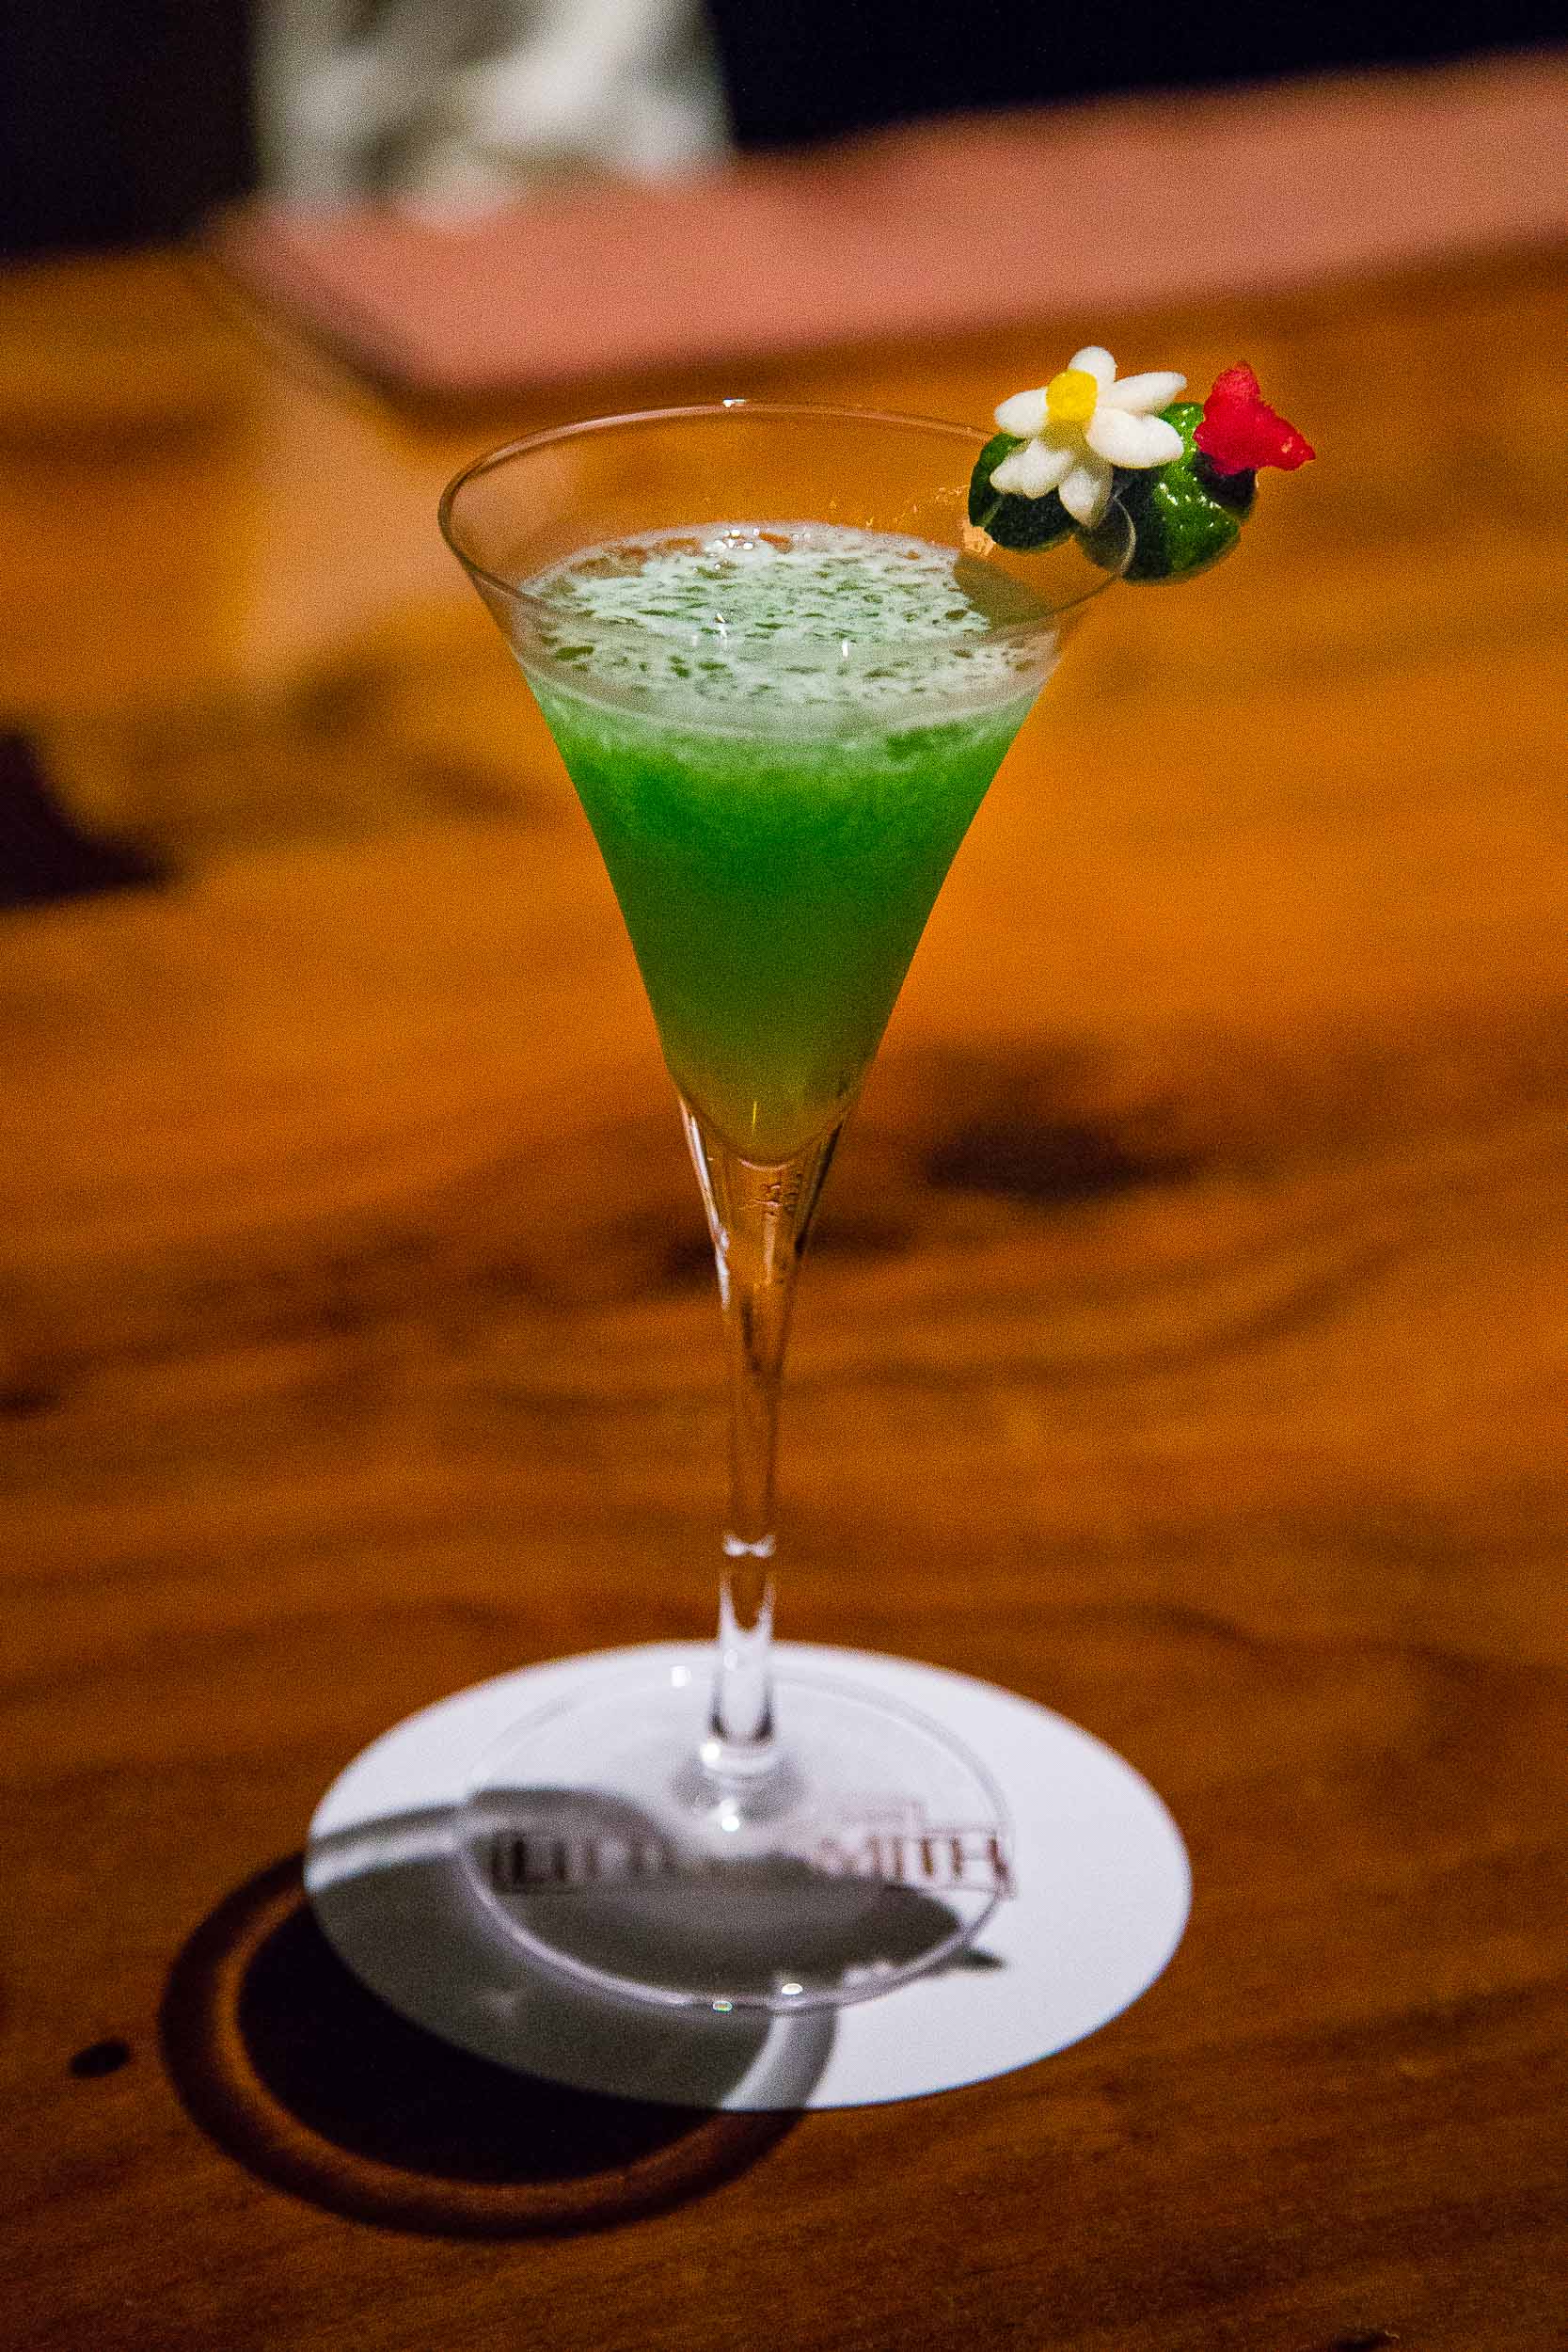 Matcha and yuzu cocktail, winner one year for best original cocktail in Japan